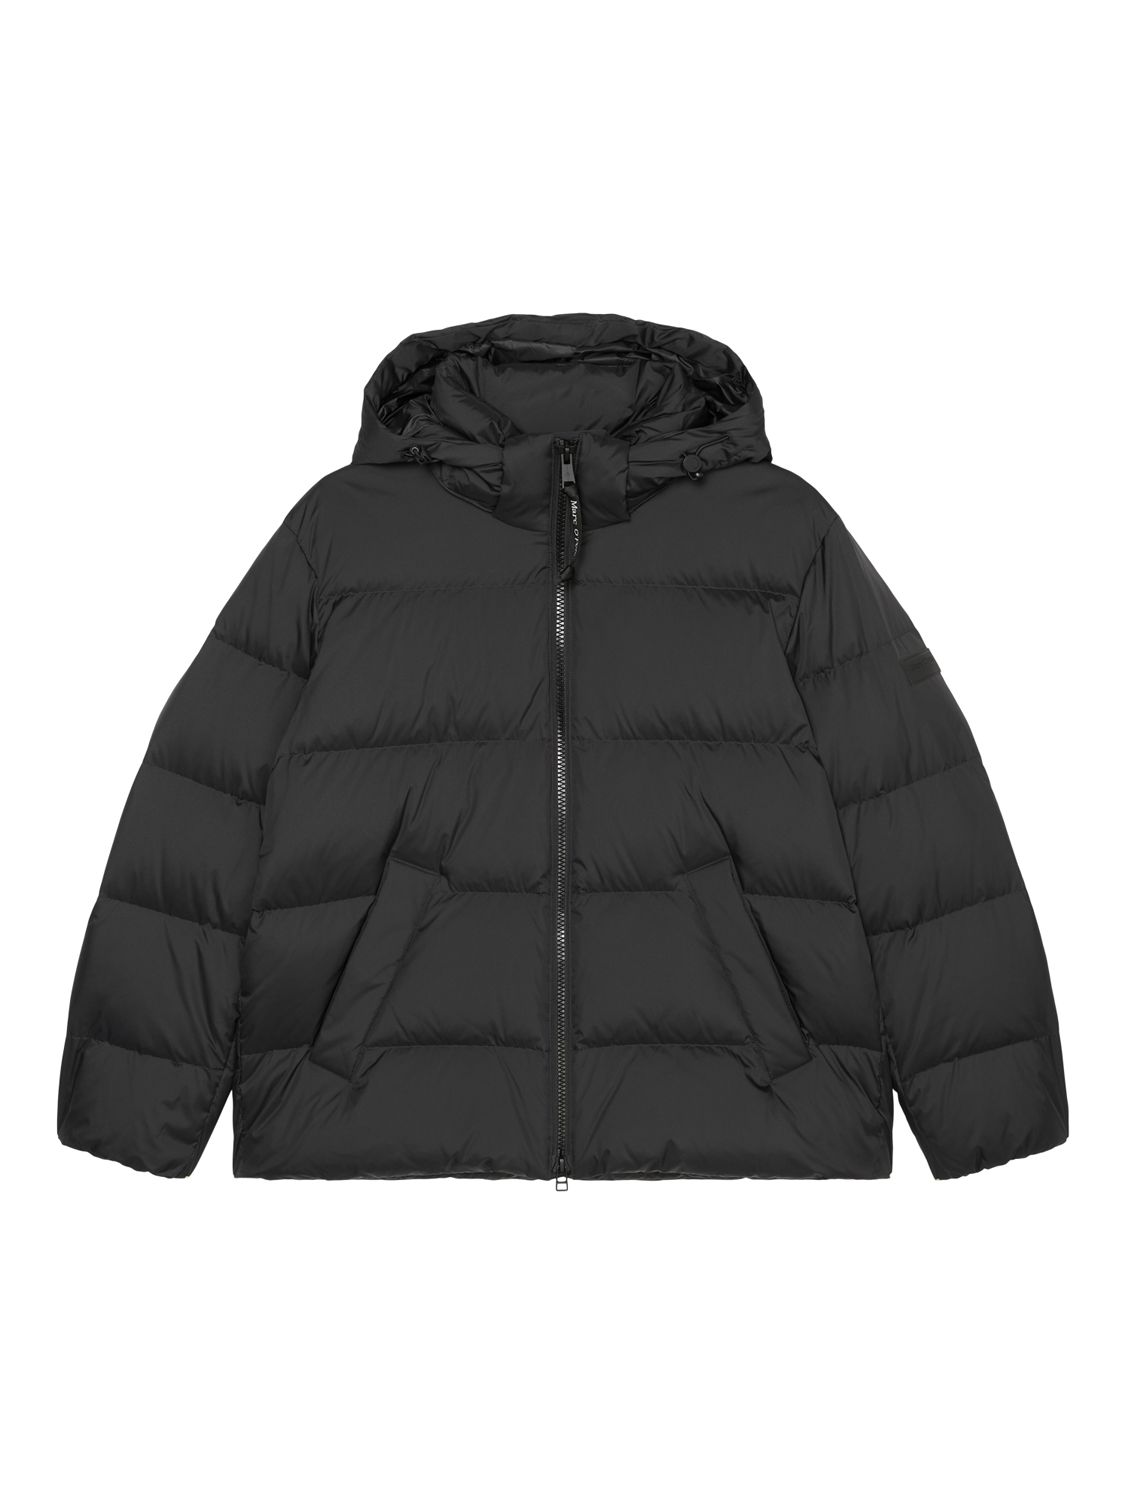 Marc O'Polo Oversized Down Puffer Jacket, Black at John Lewis & Partners